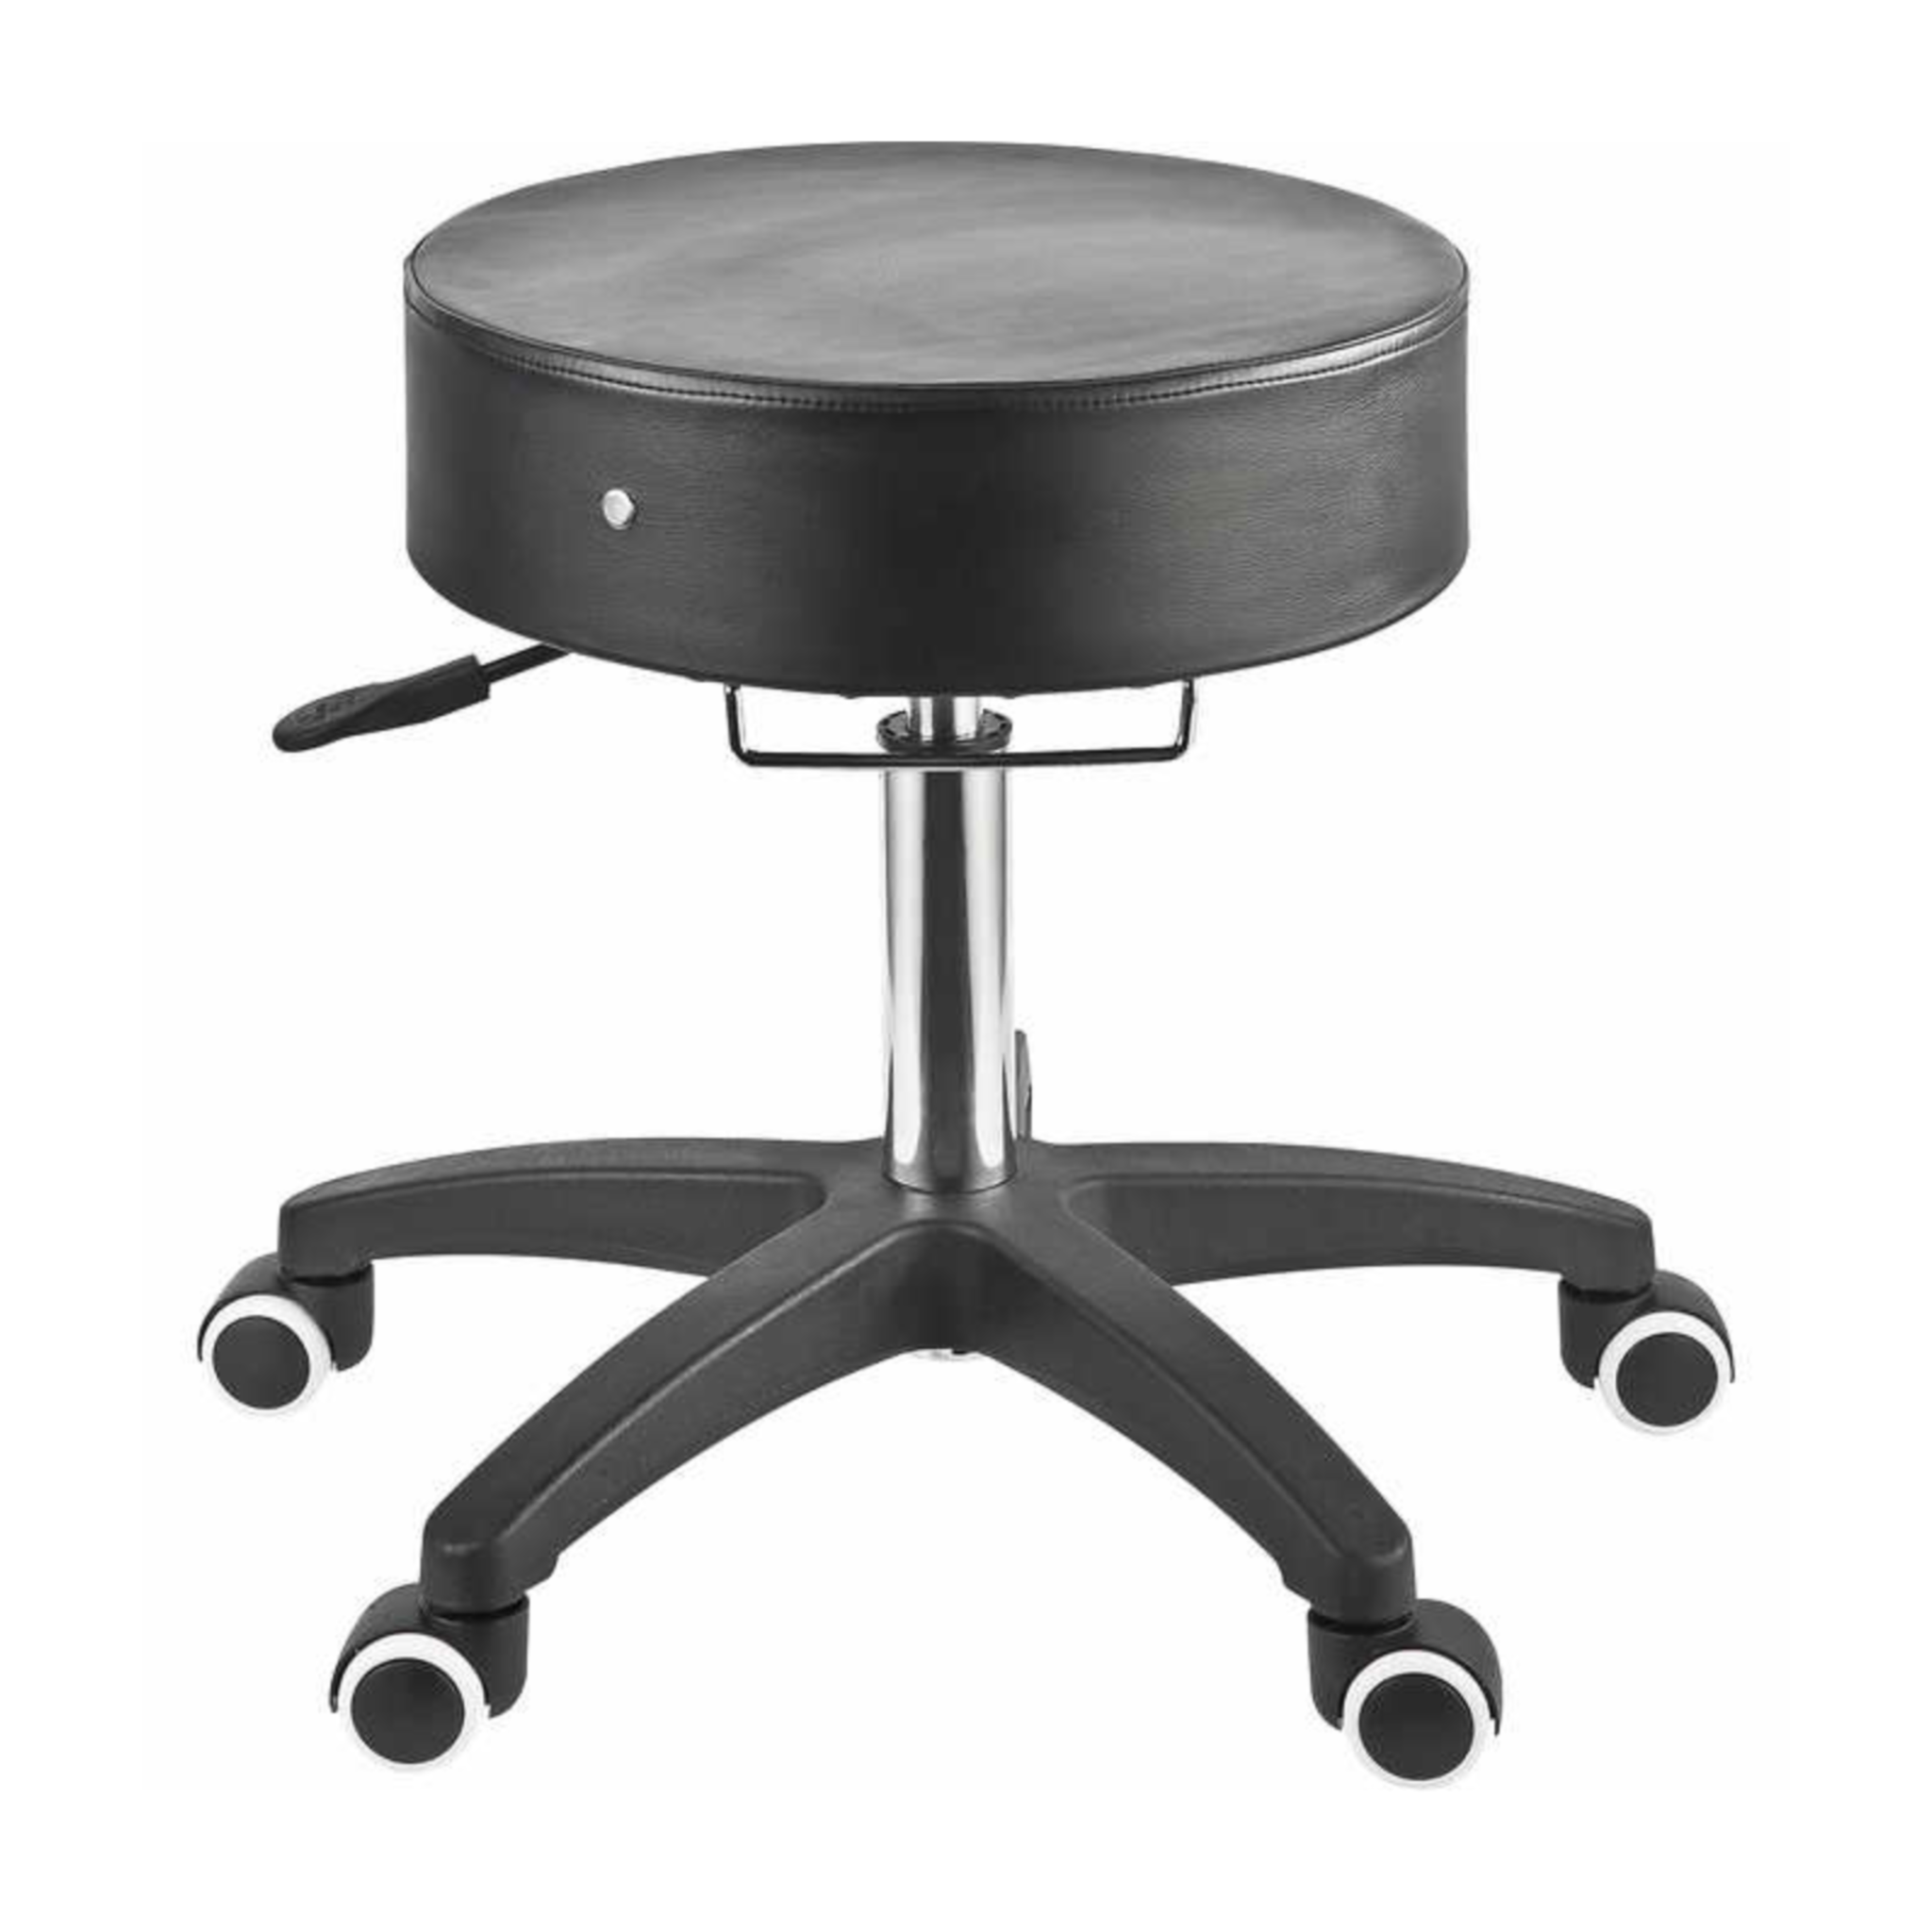 Rolling Pneumatic Stool for Therapists, Clinics & Wellness Practitioners